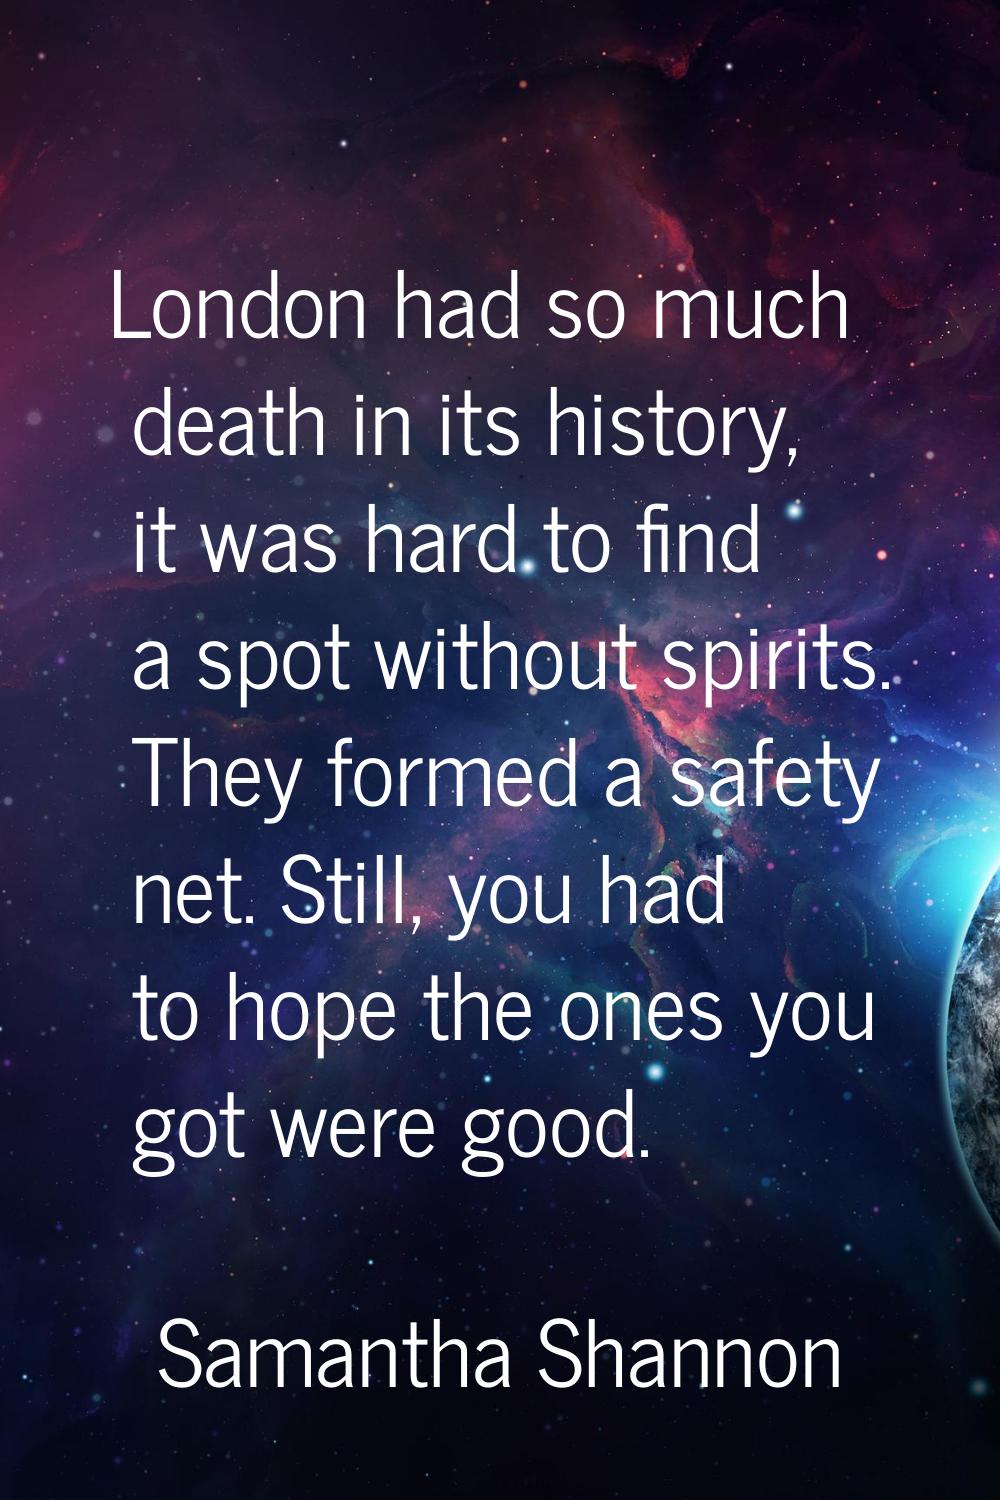 London had so much death in its history, it was hard to find a spot without spirits. They formed a 